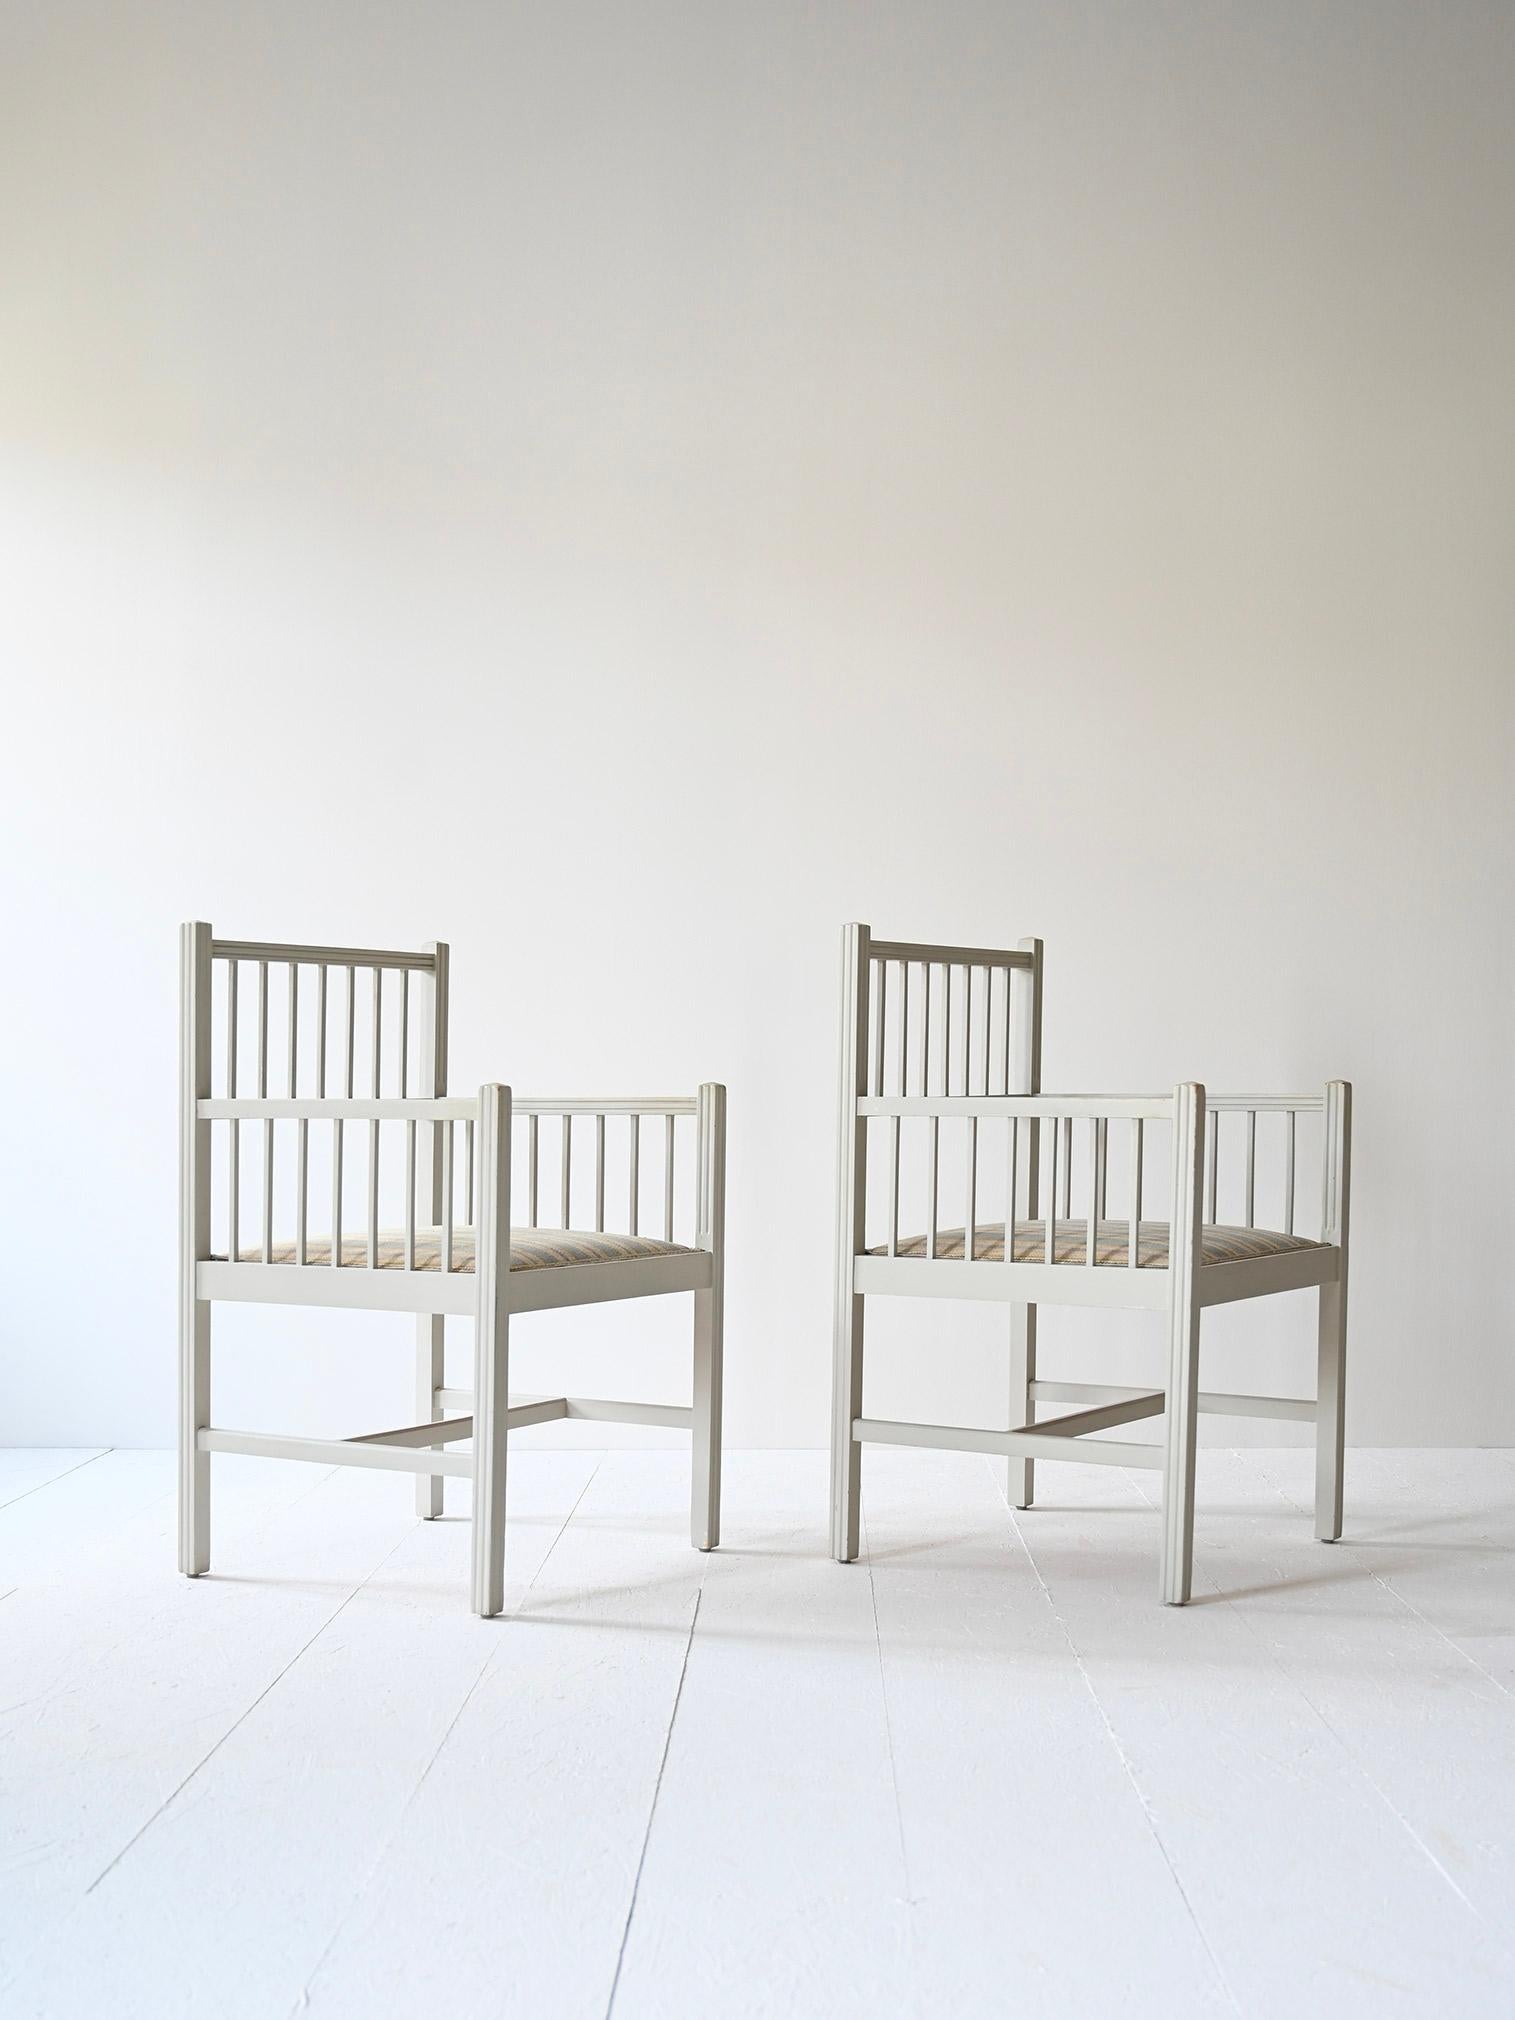 Pair of Empire-style chairs from Sweden.
The wooden frame is painted white and the seat is upholstered and covered with original period striped fabric.
Ideal for the bedroom or hall to give a refined and unique look to the room.

Good condition. A